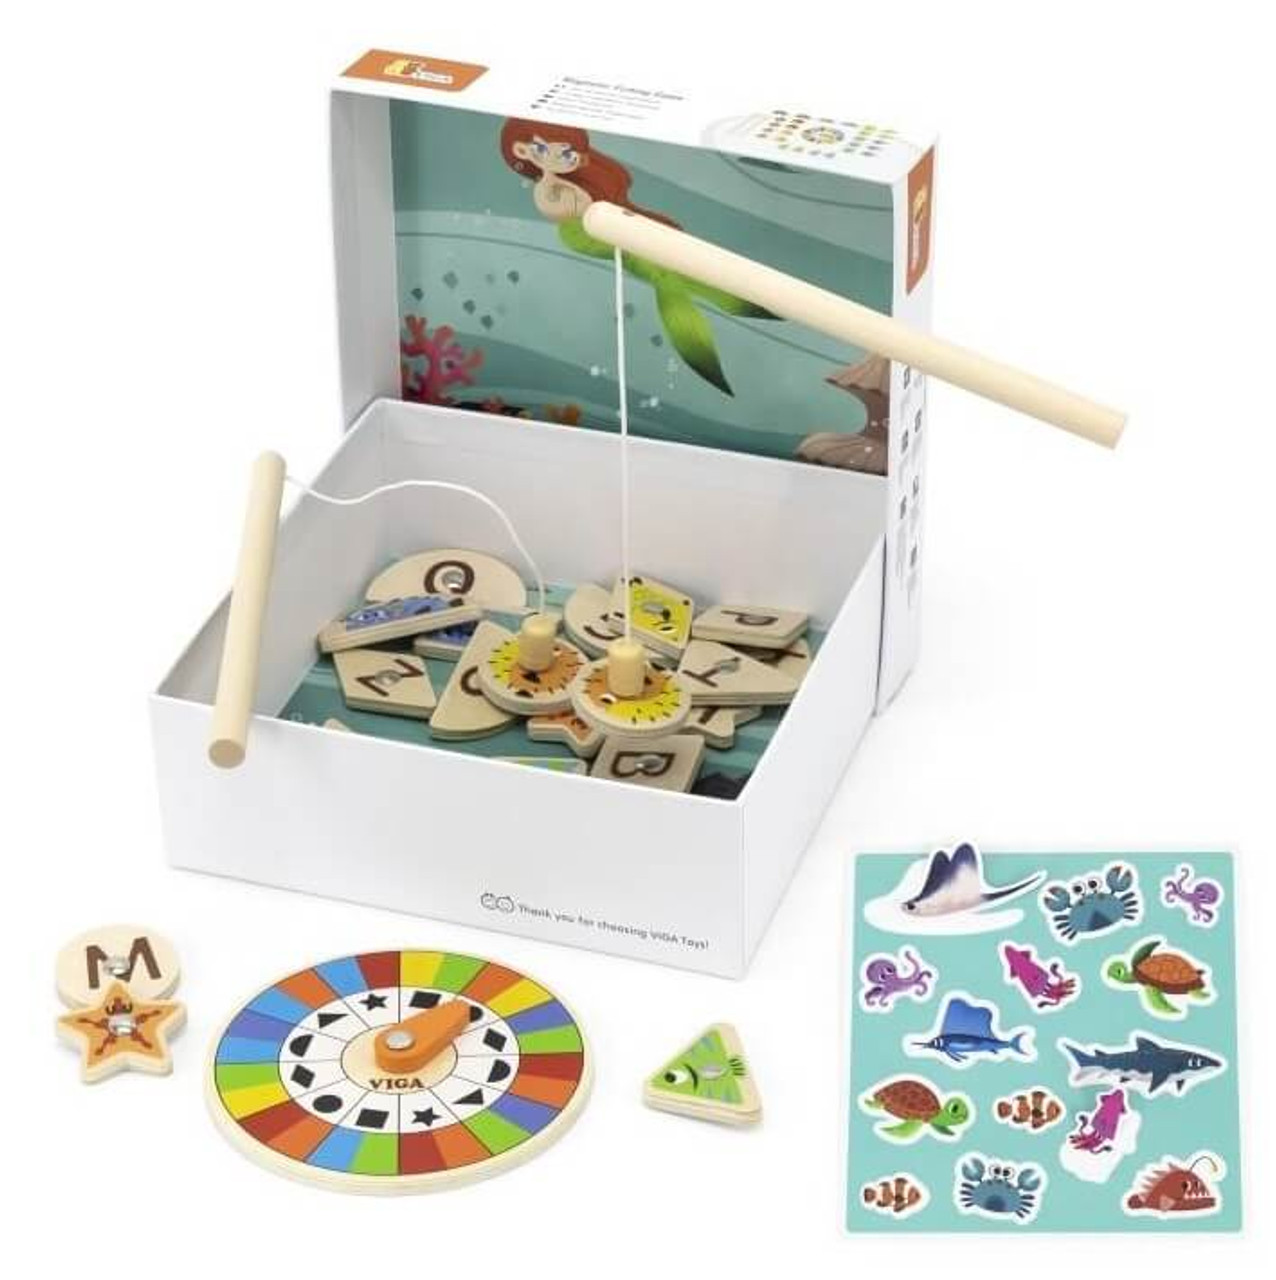 Wooden Magnetic Fishing Game on Sale! Fast Australia Wide Shipping